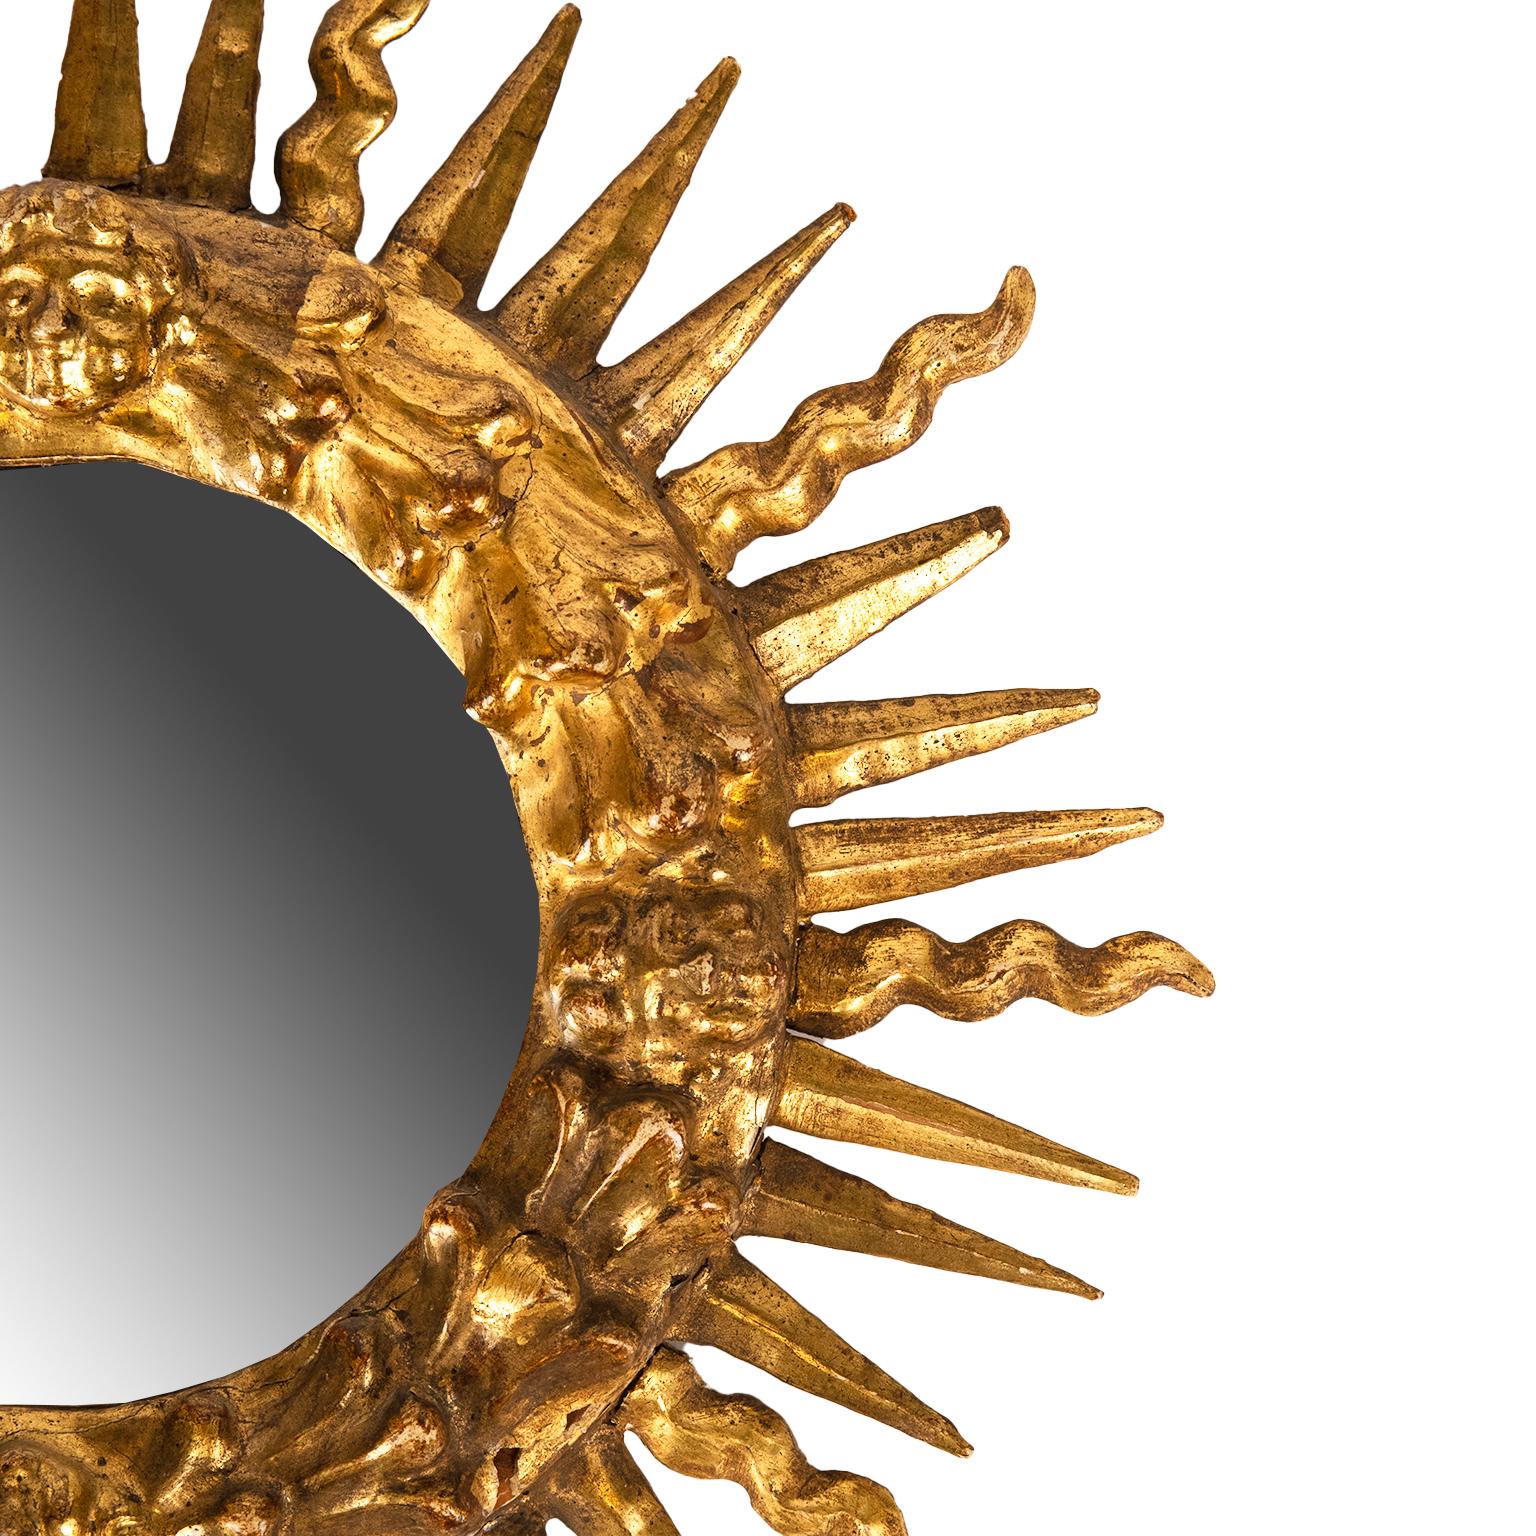 A classic gilt wood and gesso diminutive sunburst mirror in excellent antique condition with replacement mirror.
Great antique mirror that can fit in any decor!